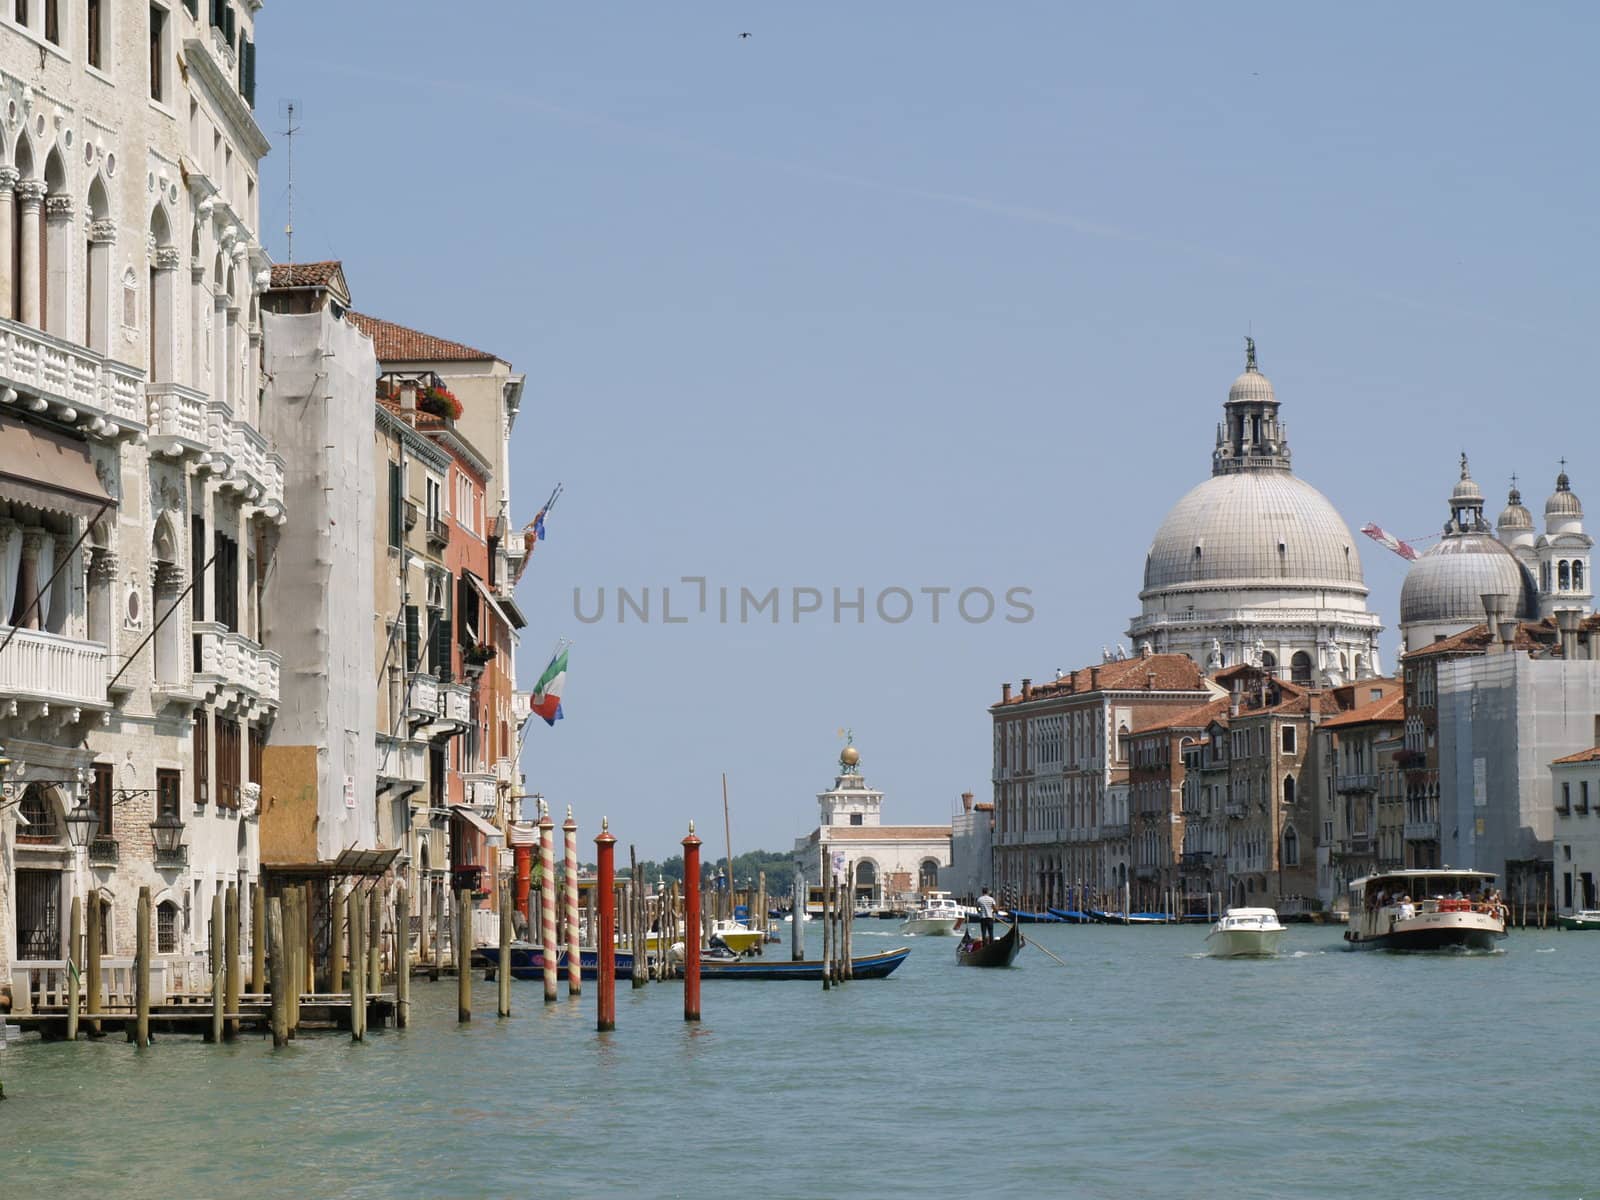 Venice, Italy by anderm